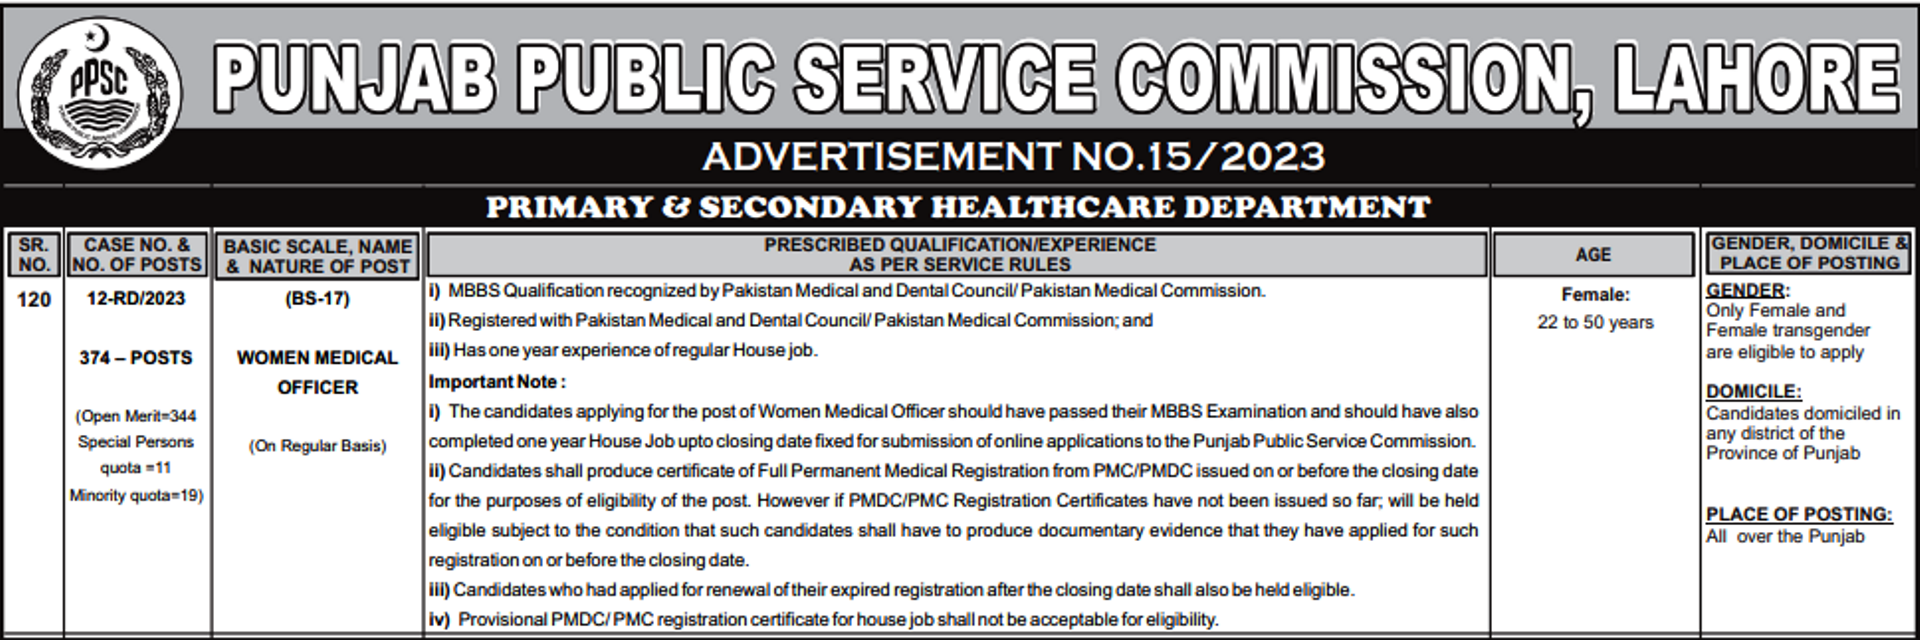 Women Medical Officers (BS-17)